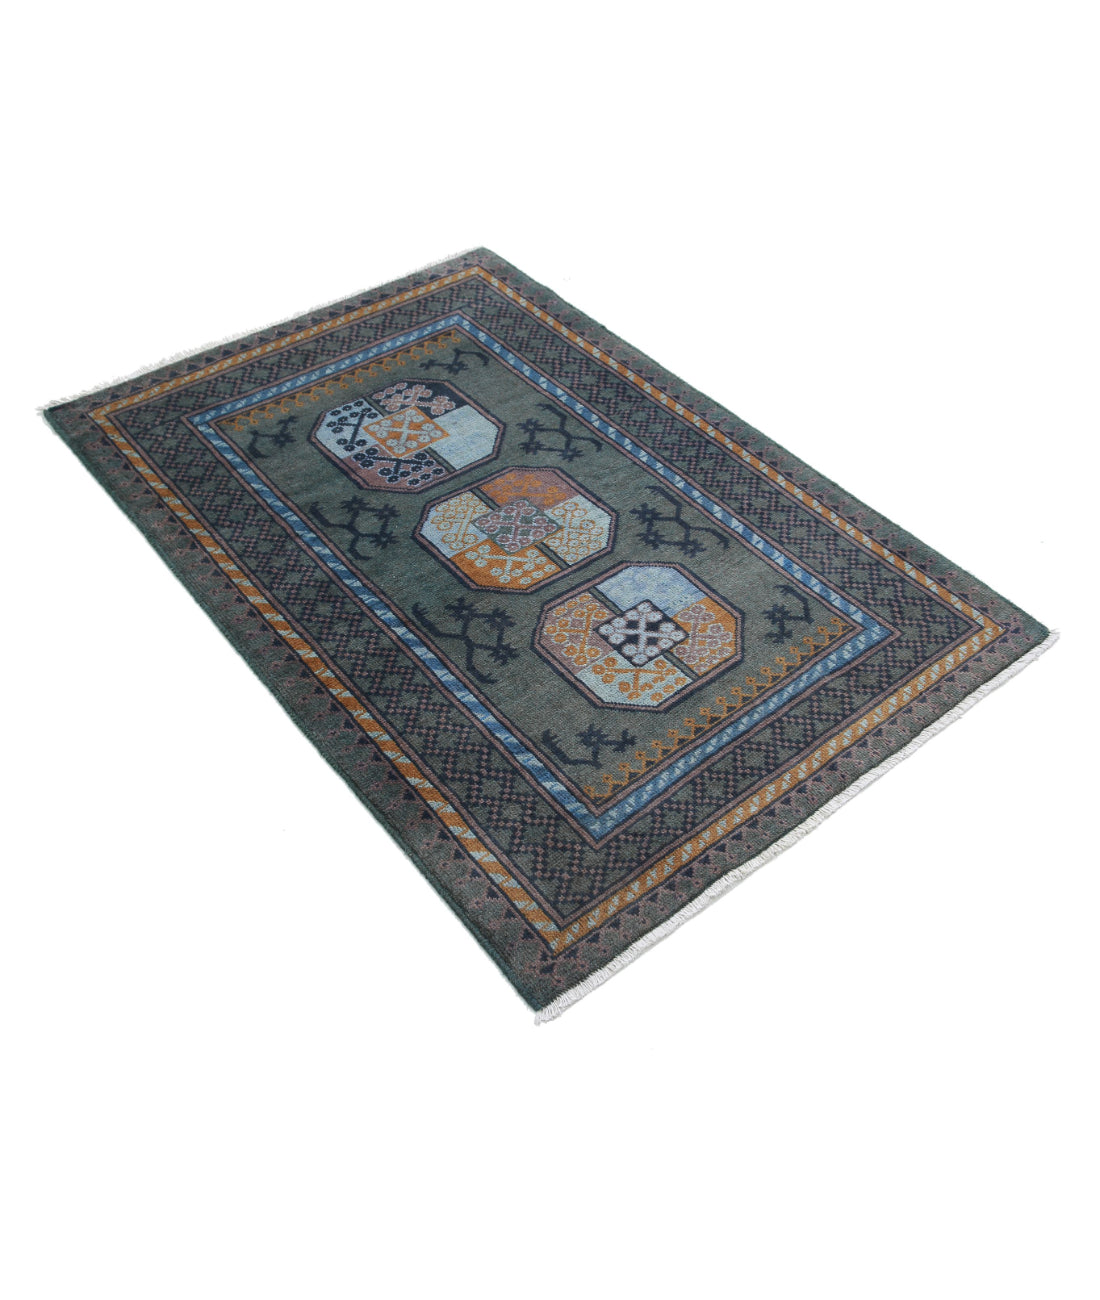 Revival 3'4'' X 4'11'' Hand-Knotted Wool Rug 3'4'' x 4'11'' (100 X 148) / Green / Blue